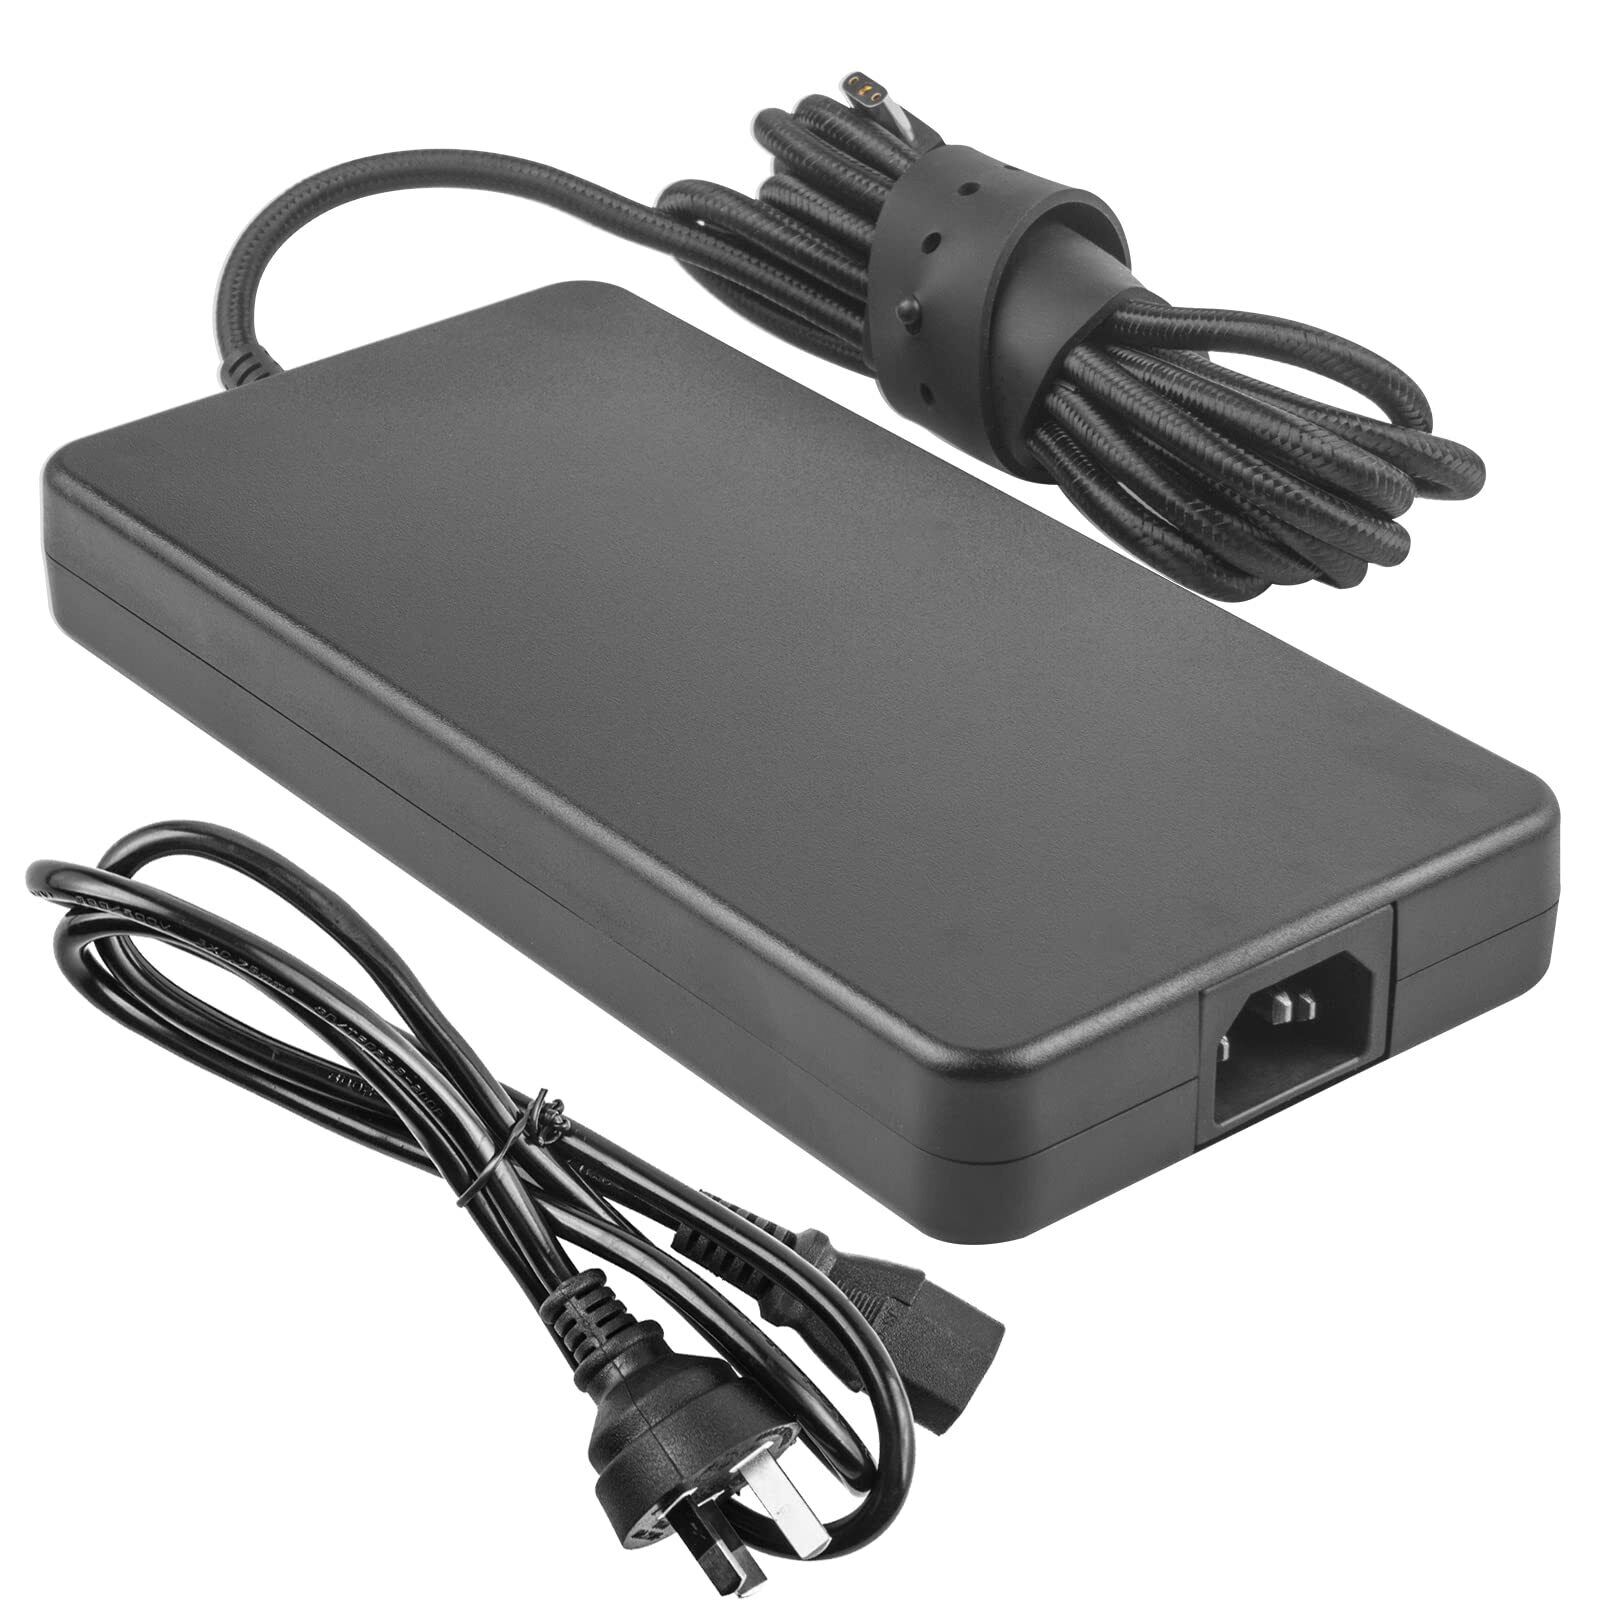 230W 19.5V 11.8A Razer Blade Charger, 3-Prong AC Adapter Supply for Razer Bla...